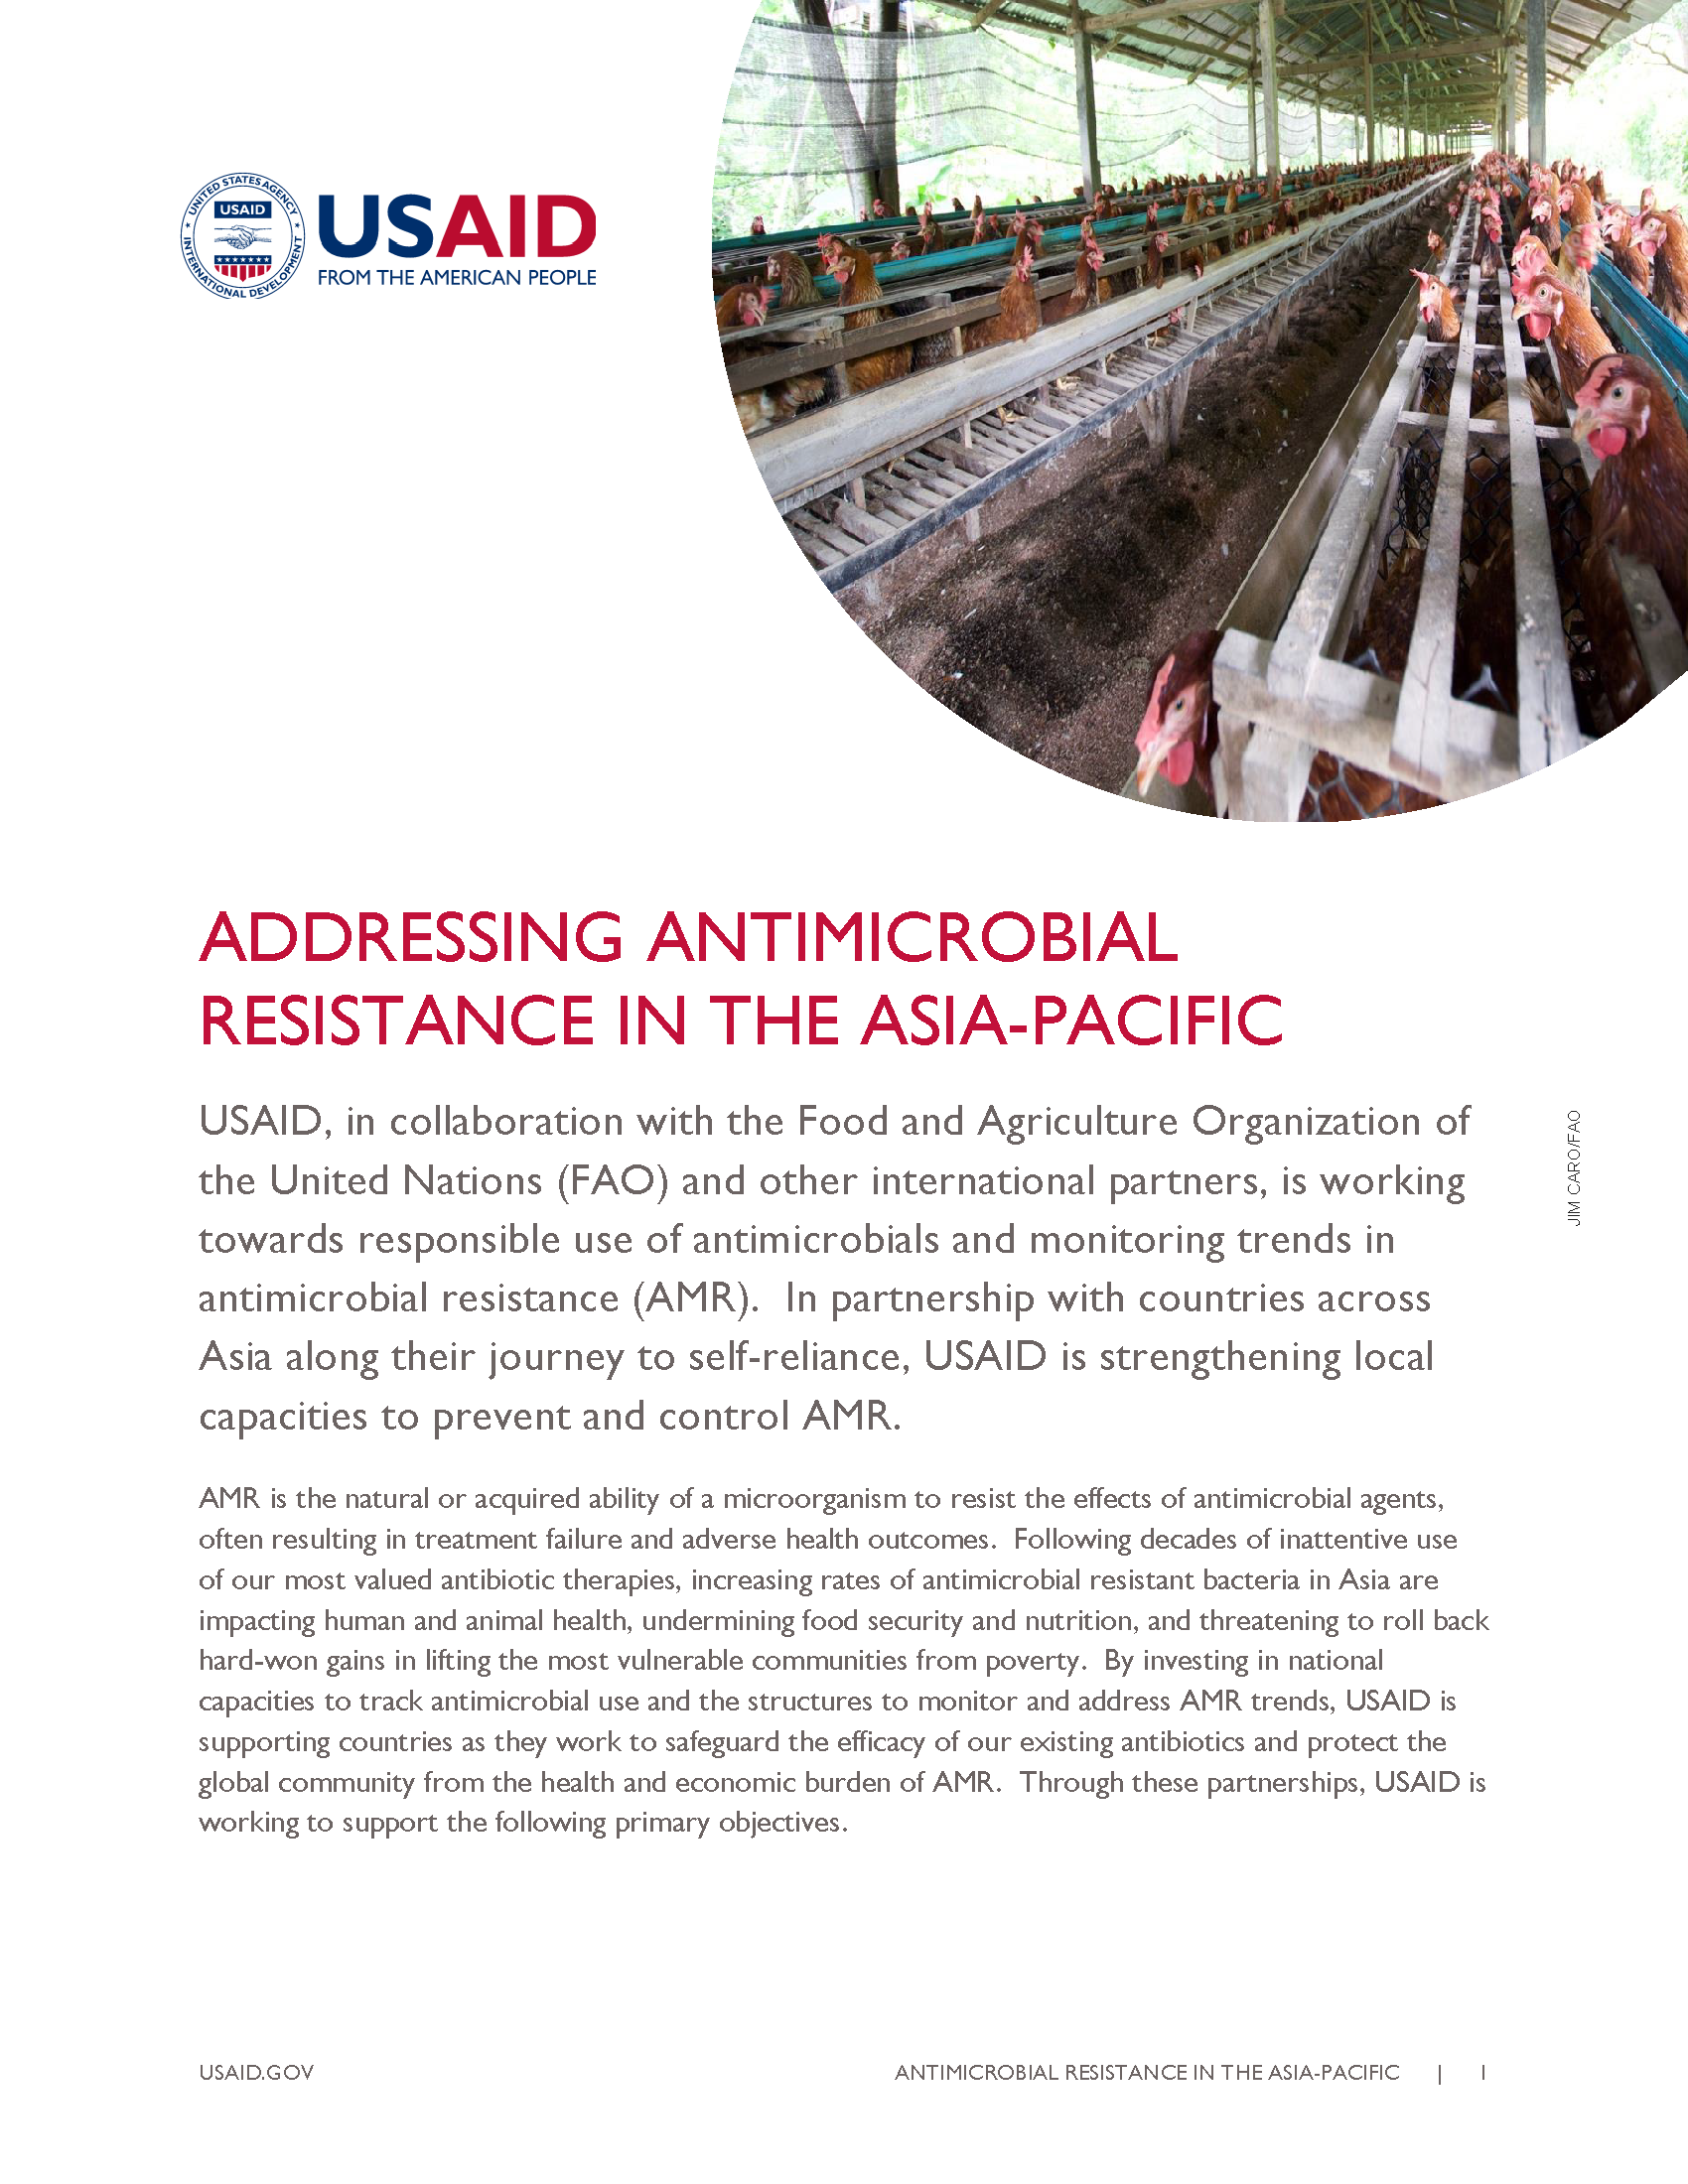 ADDRESSING ANTIMICROBIAL RESISTANCE IN THE ASIA-PACIFIC FACT SHEET